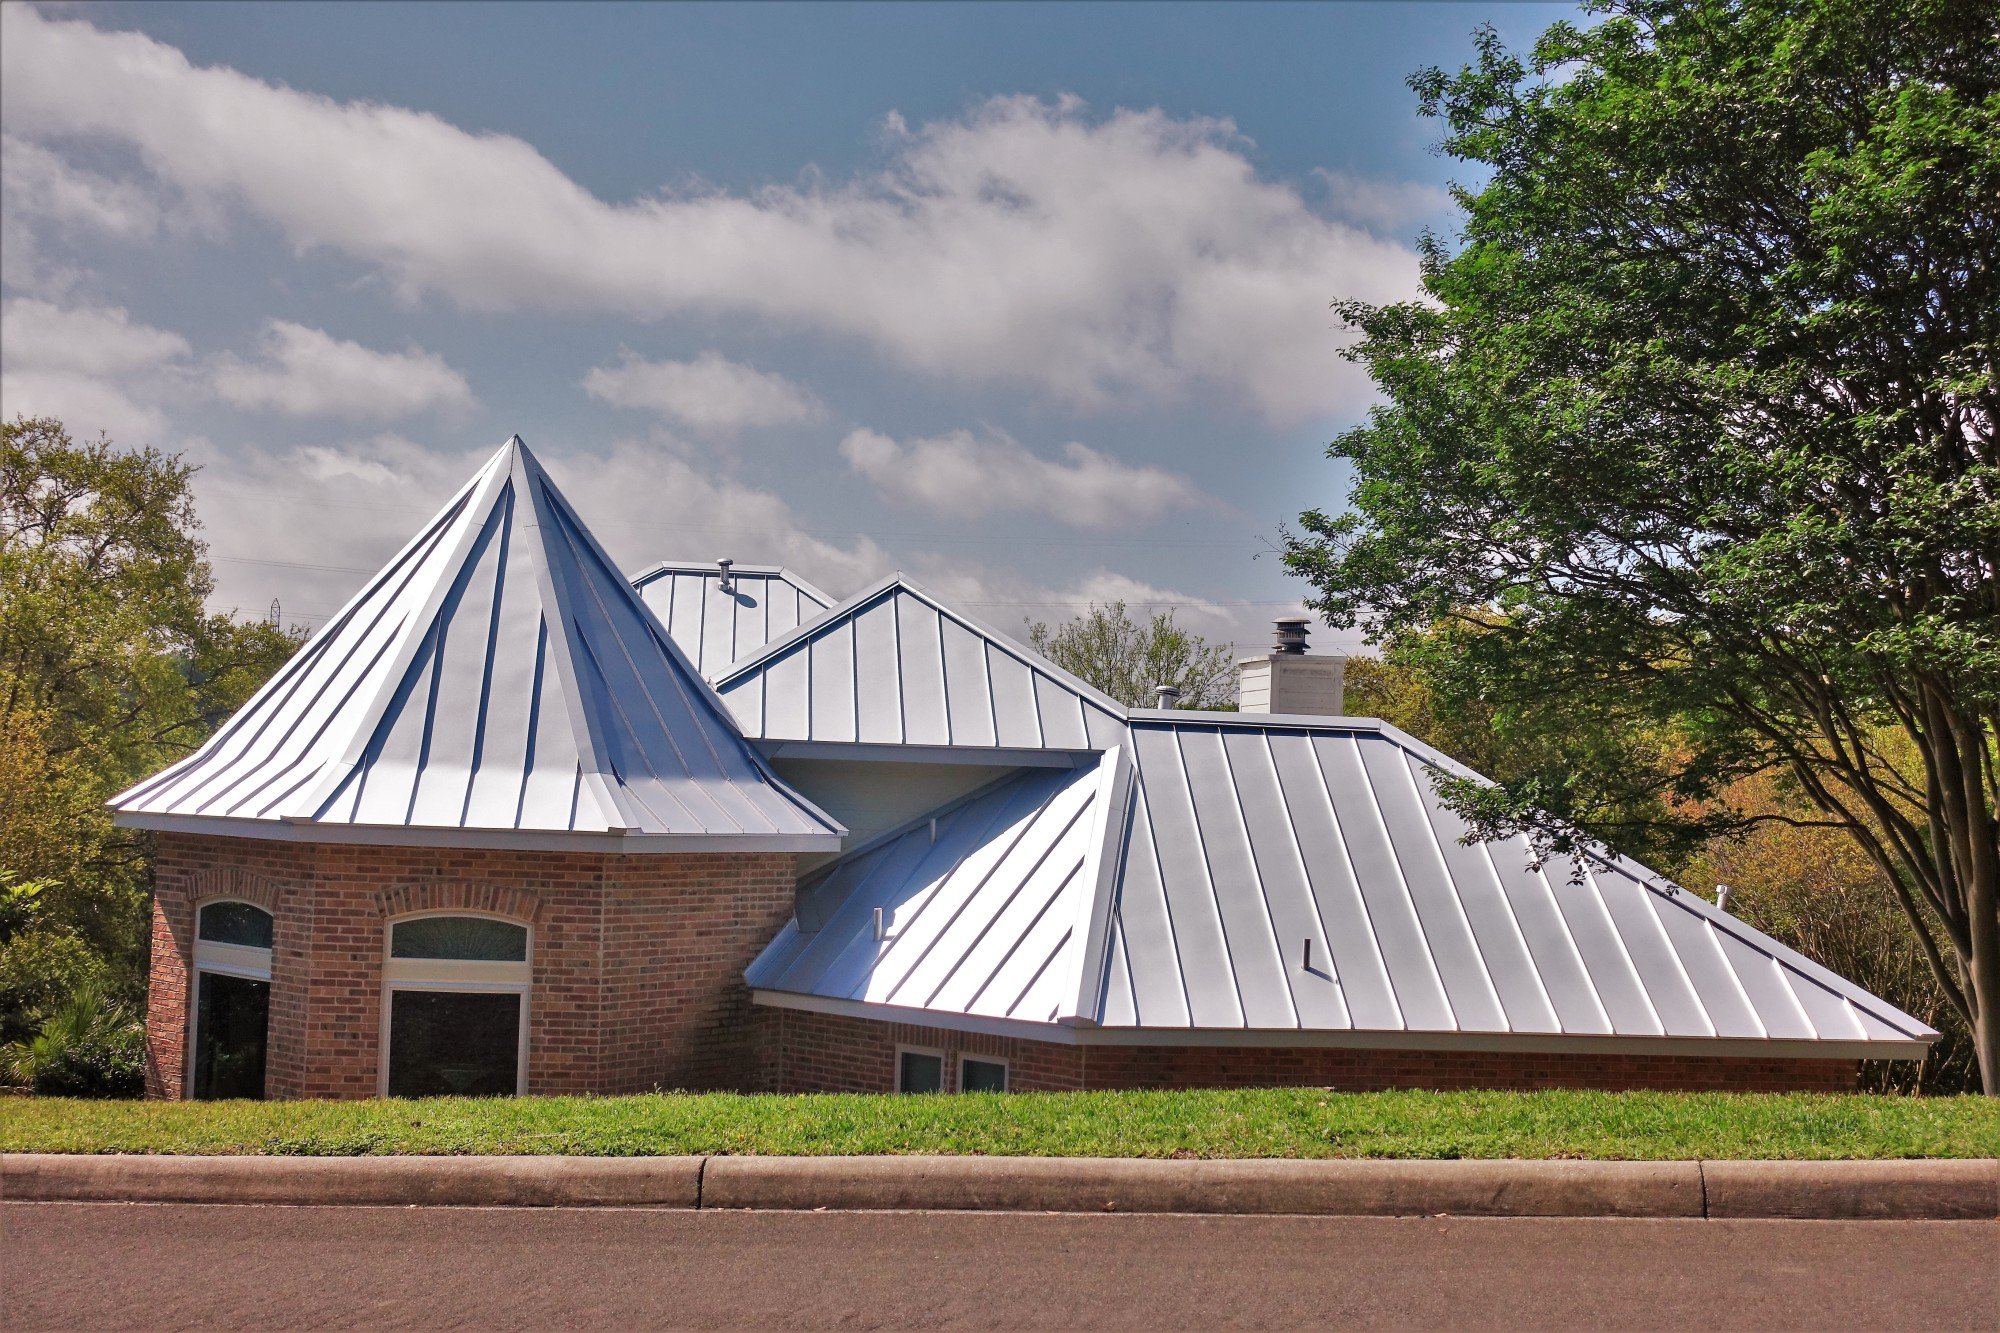 Slate roofing is one of many roofing options for your building. Read here for the pros and cons of a burnished slate metal roof to decide if it's right for you.